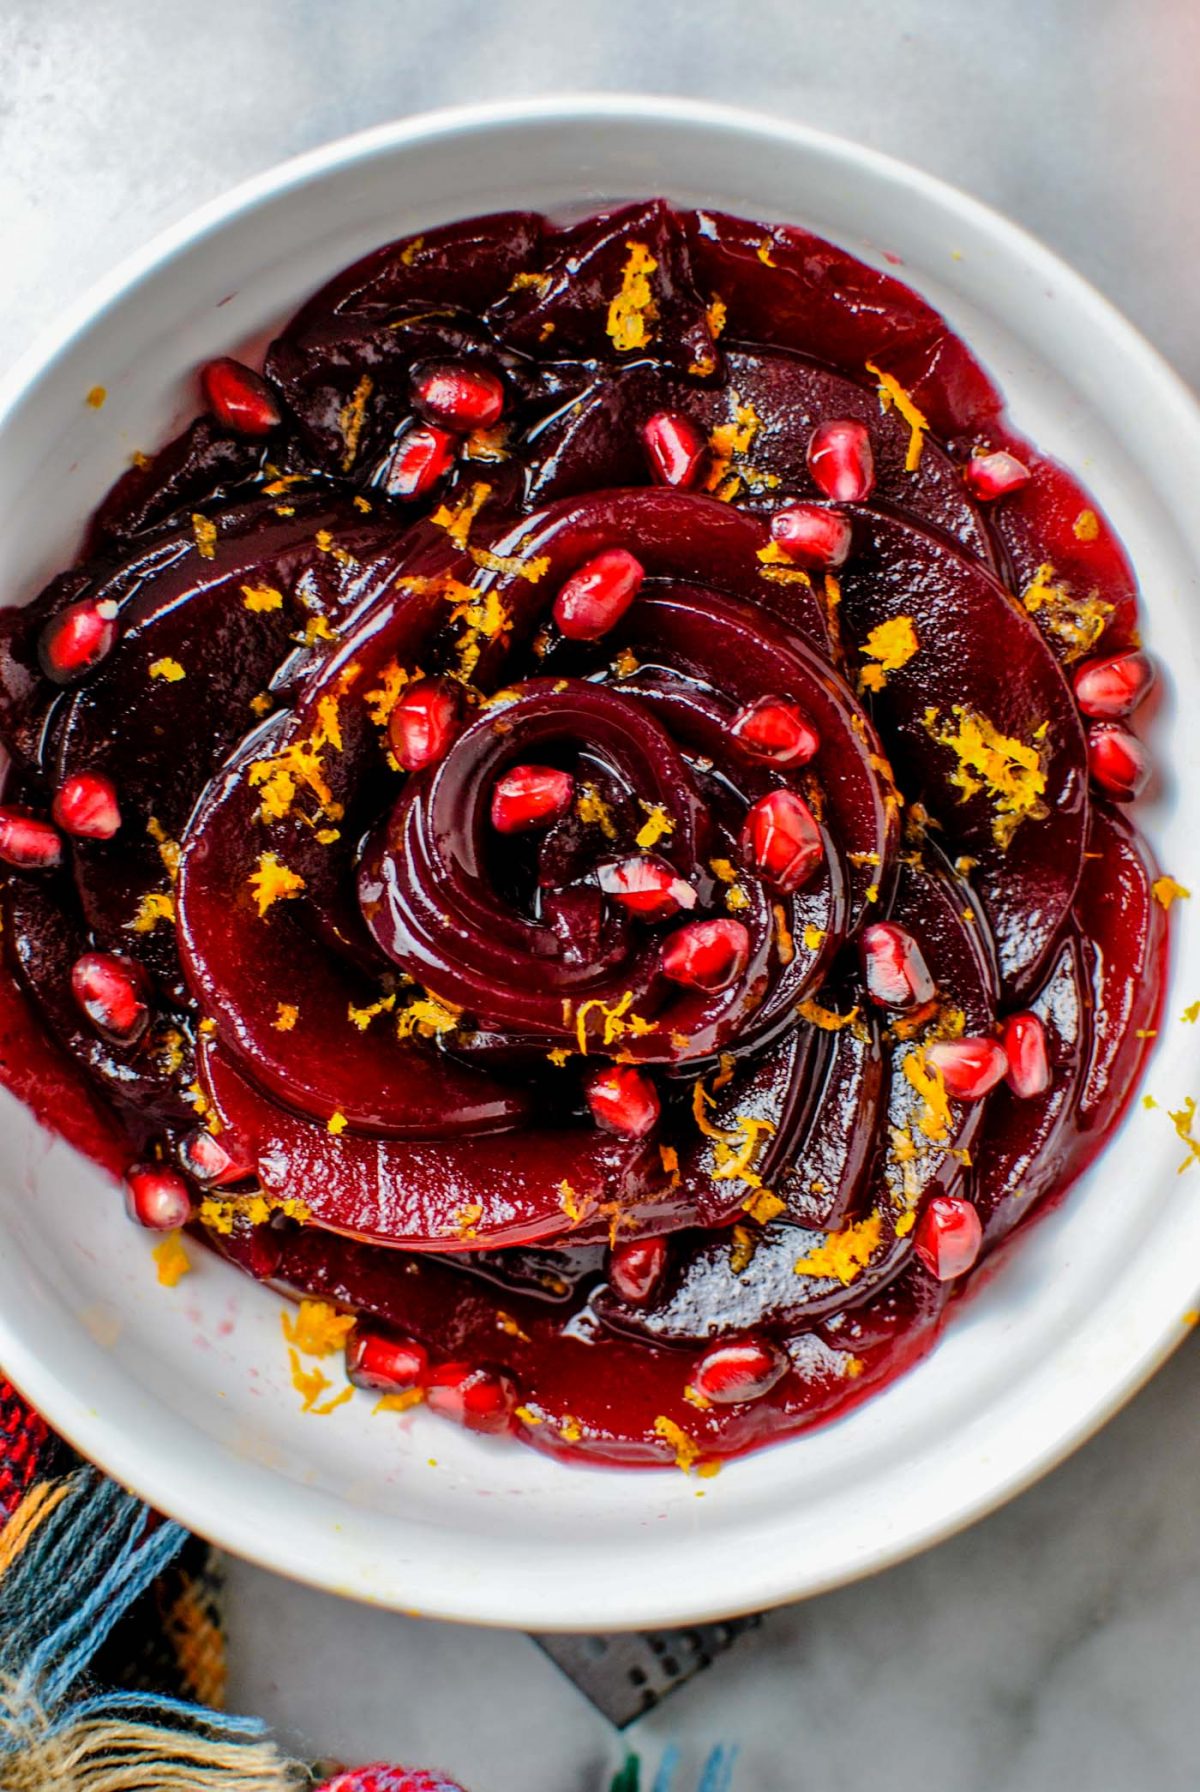 Cranberry Sauce Roses!! a quick and easy way to impress guests at thanksgiving! (super simple, impressive, and fast!) | thepikeplacekitchen.com